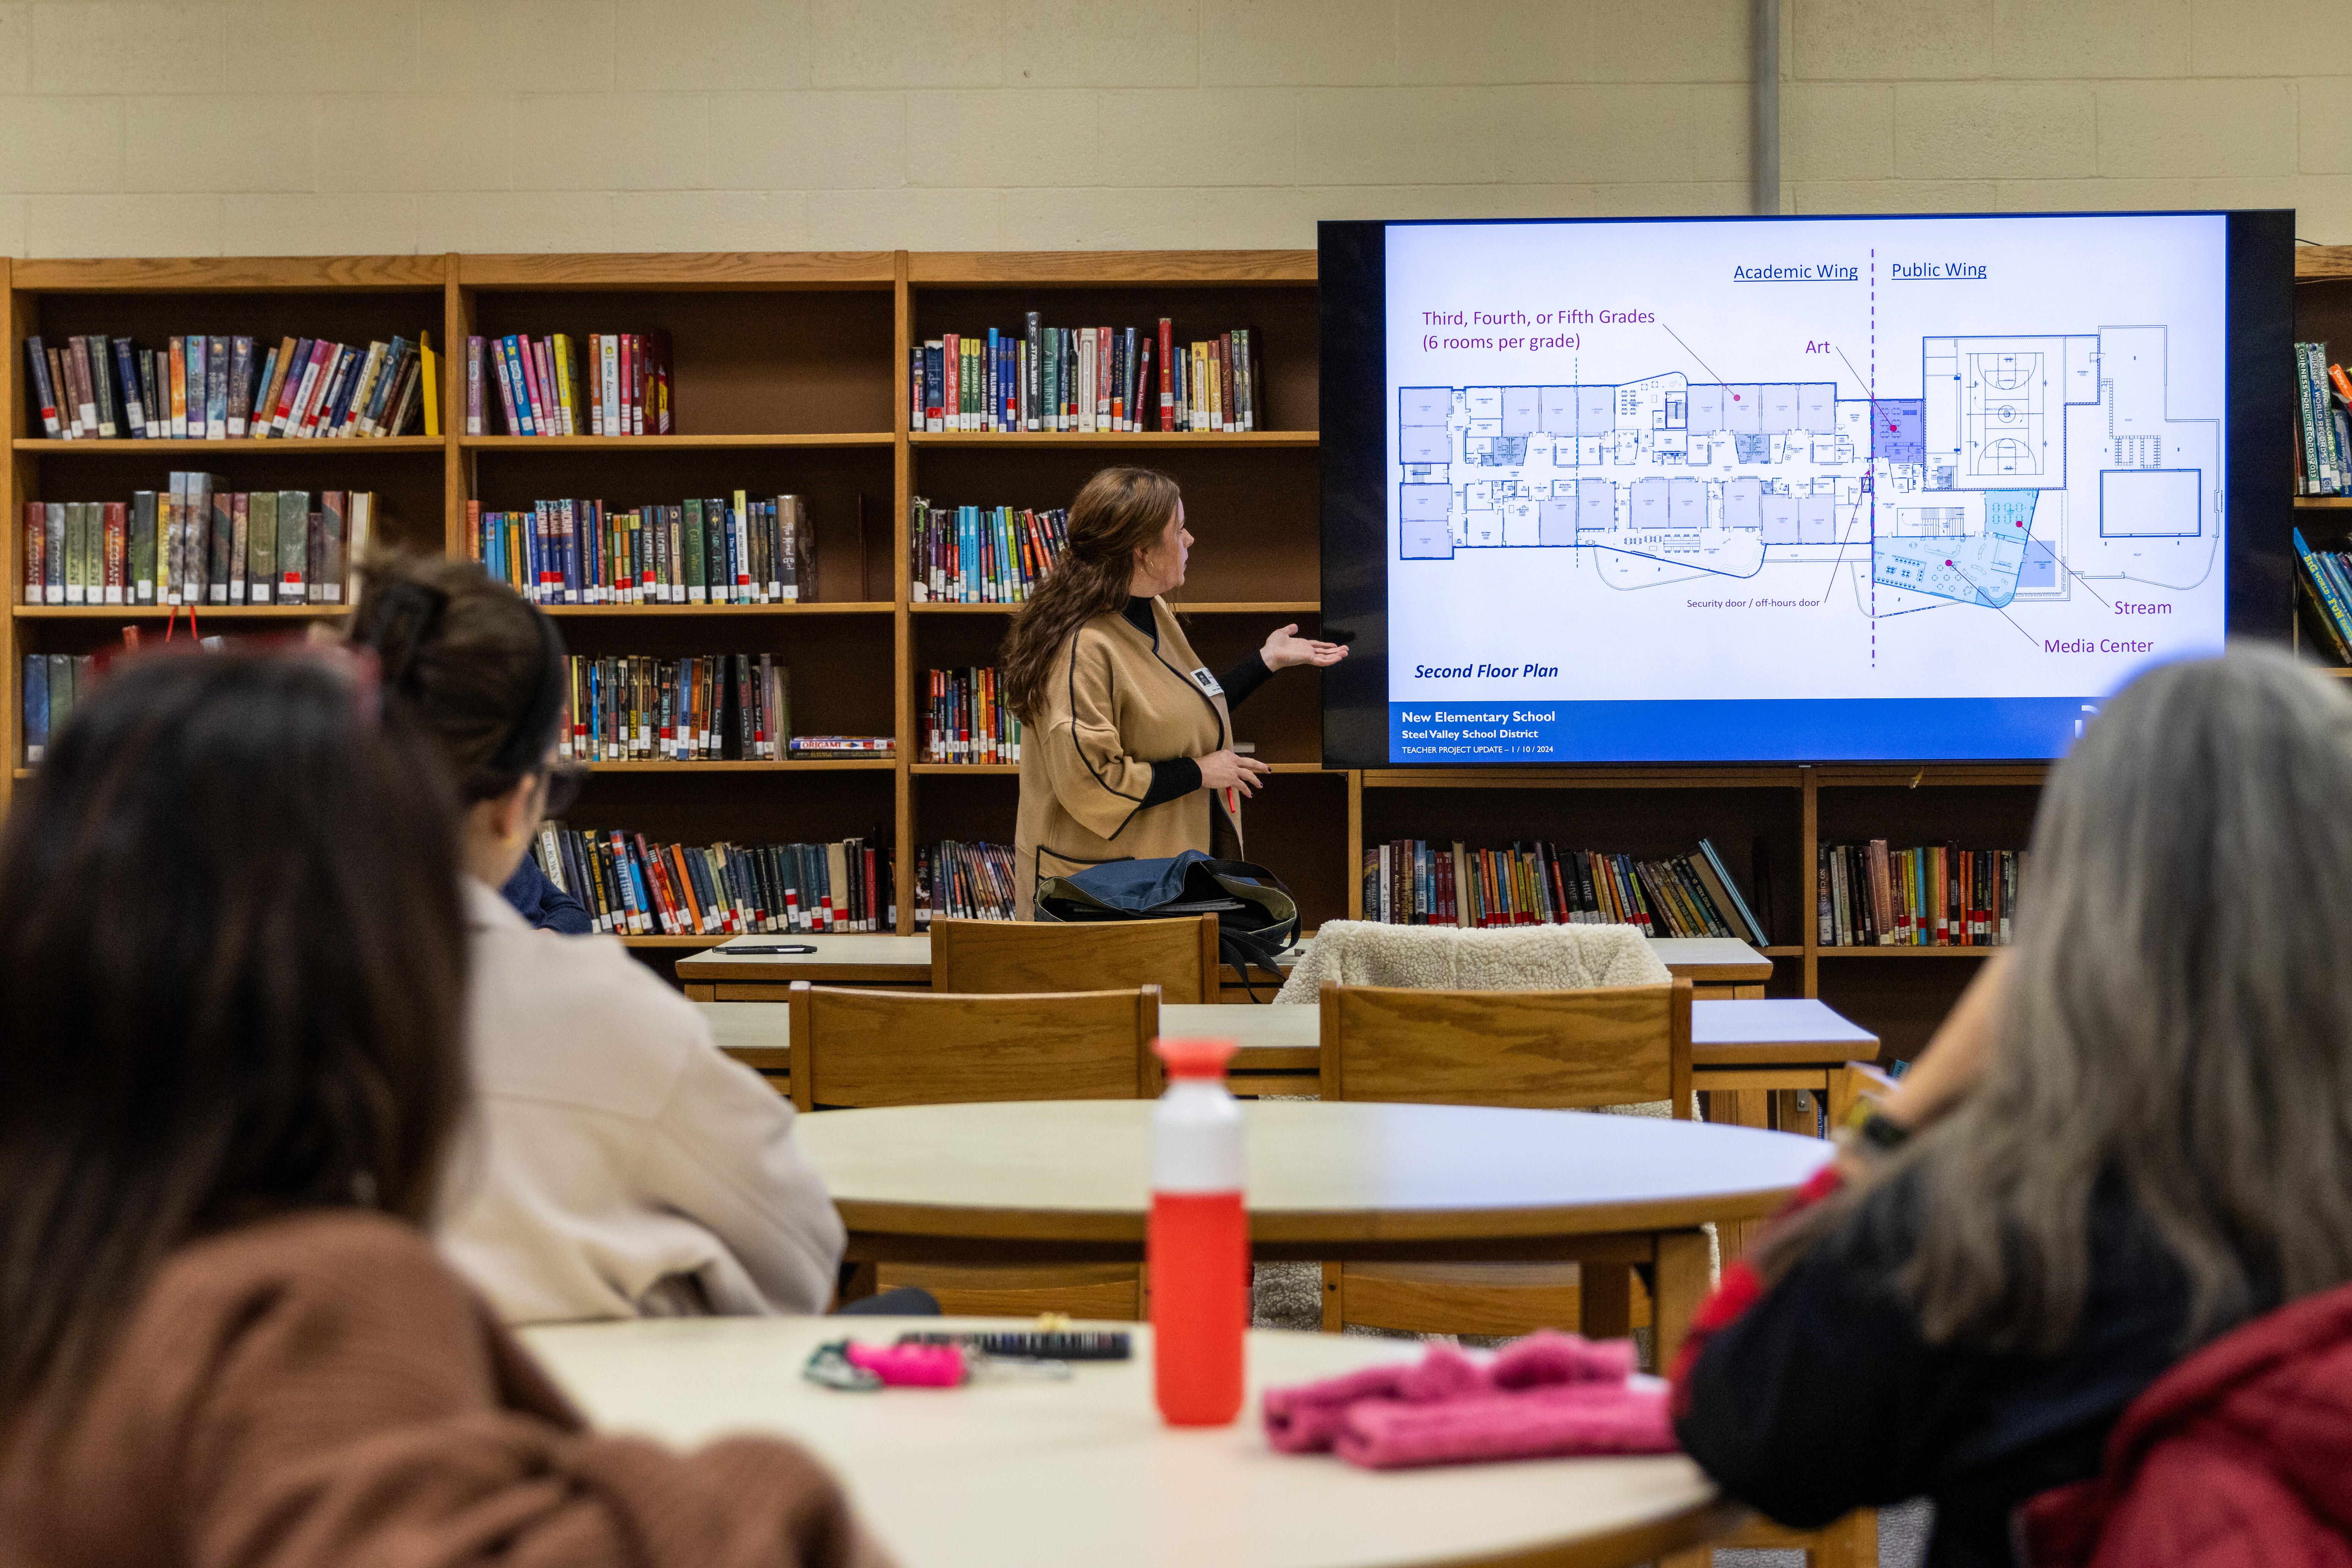 A woman stands at a digital screen and gestures to a blueprint of a building while talking to an audience in a school library